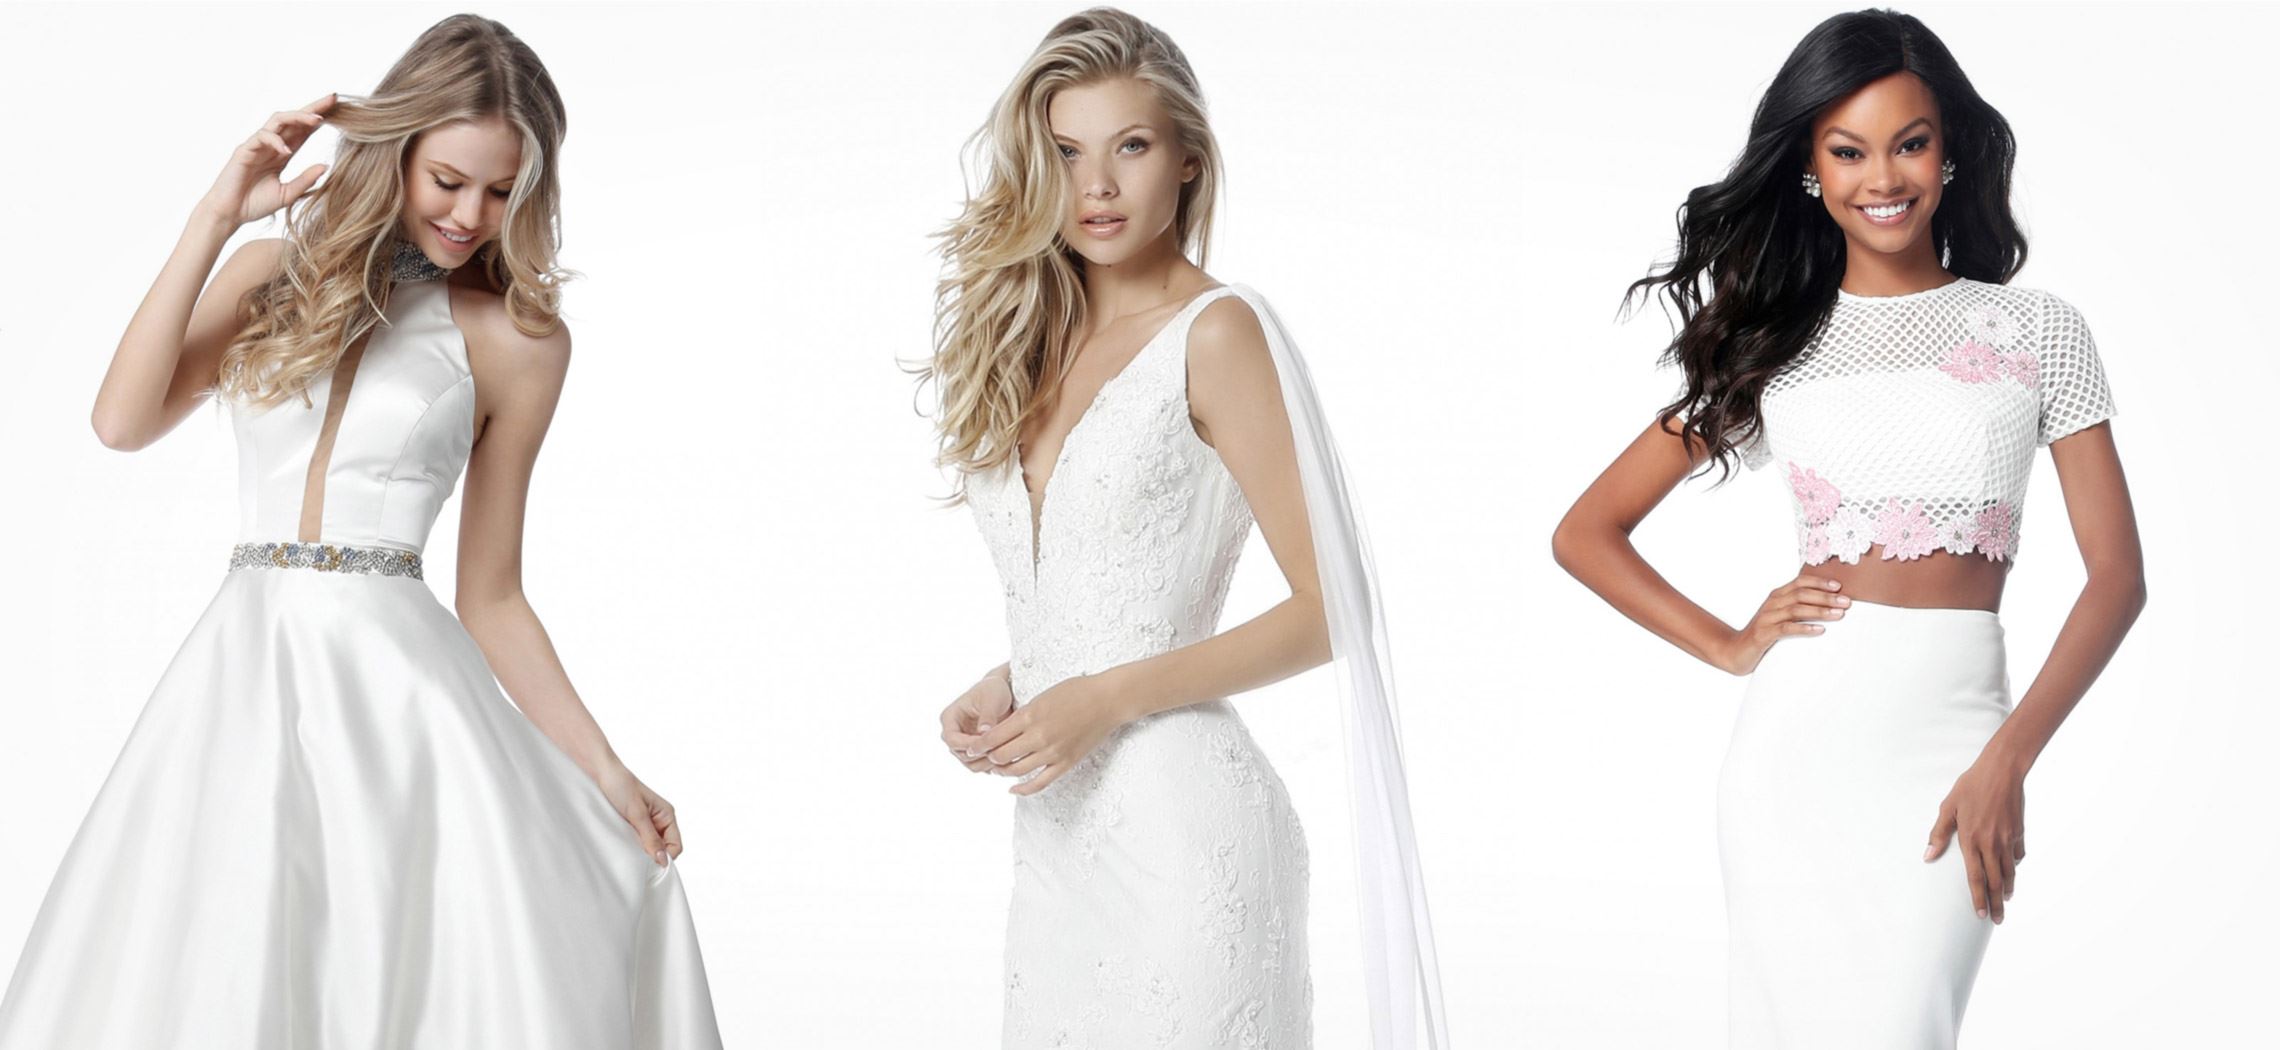 Models wearing a white dresses